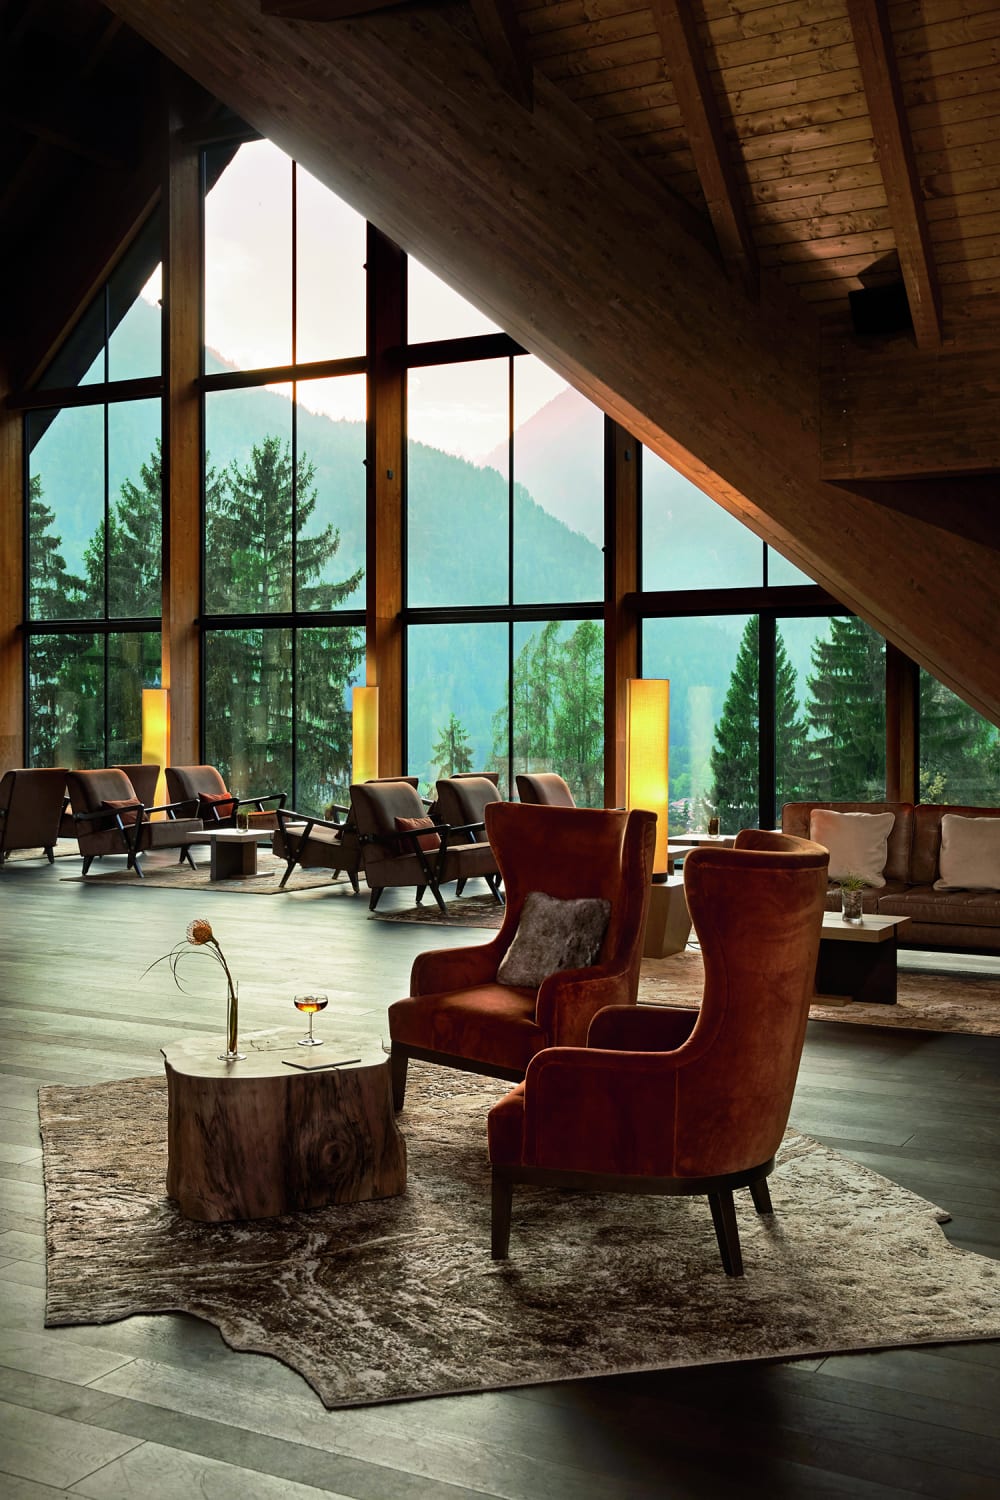 Hotel lobby with a view of the Italian Alps. The Lefay resort and spa.